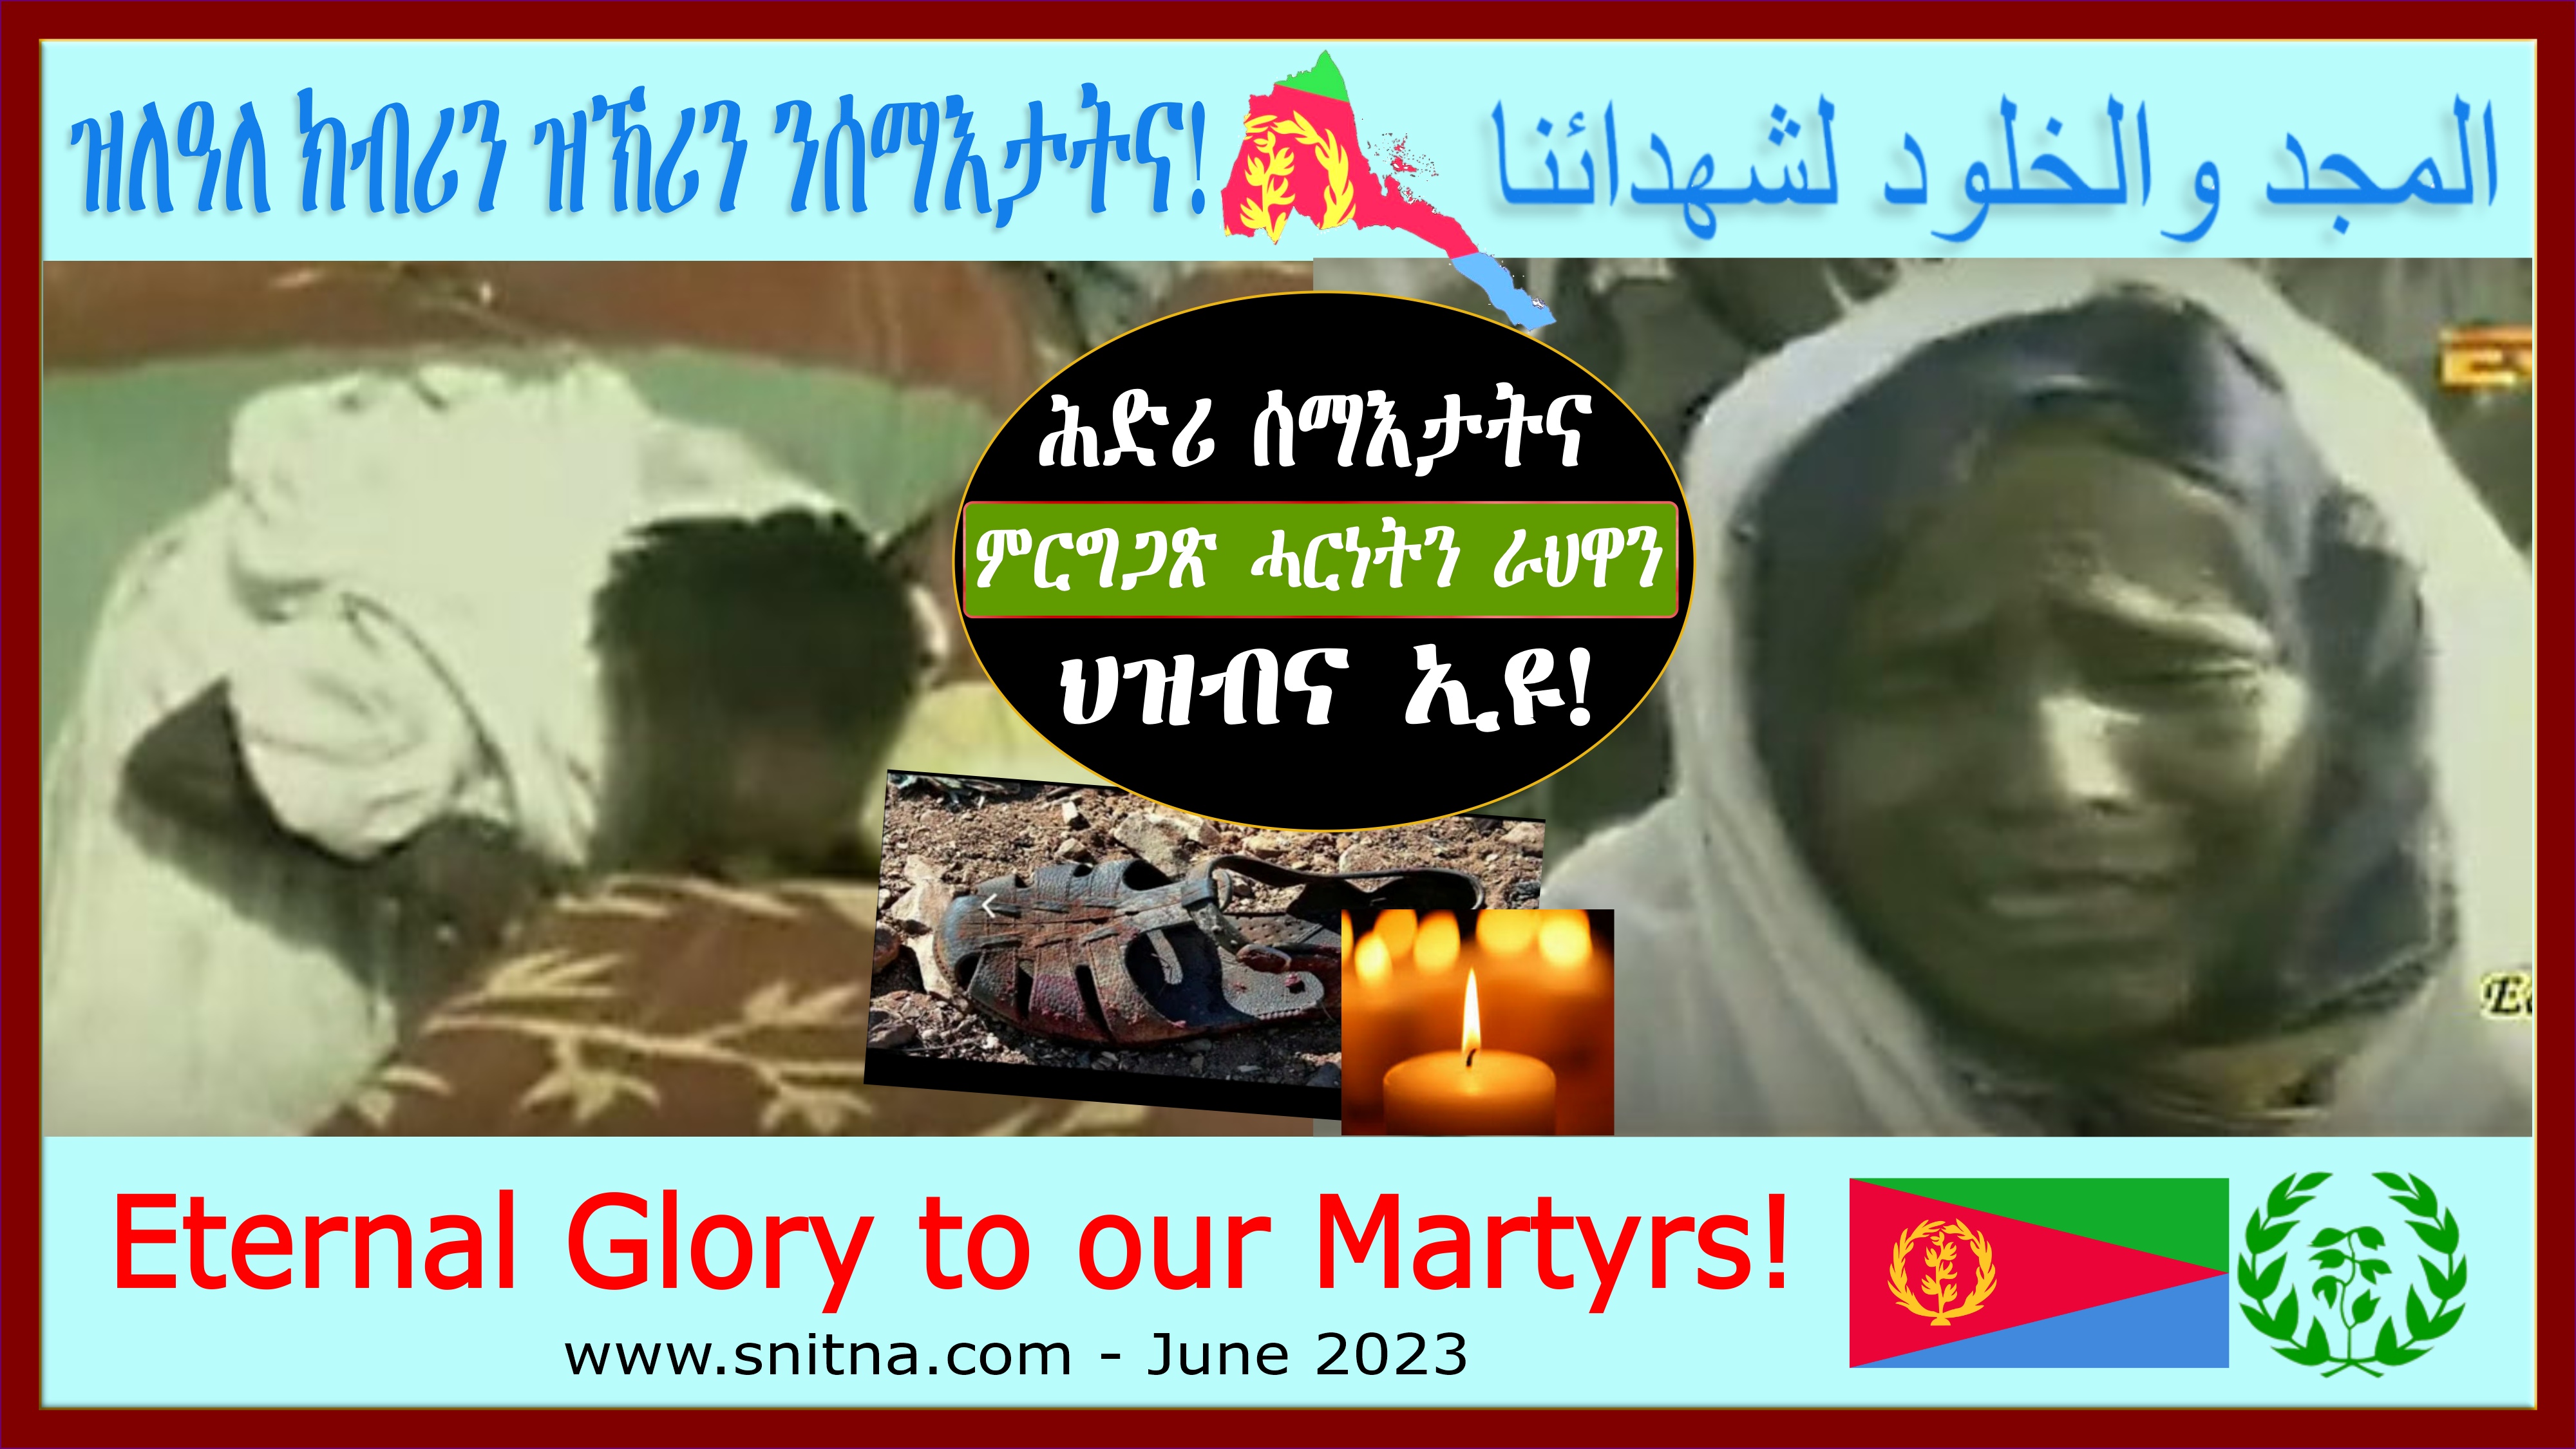 Eritrea Martyrs day, 20 June 2023: Reflections and Press Releases.